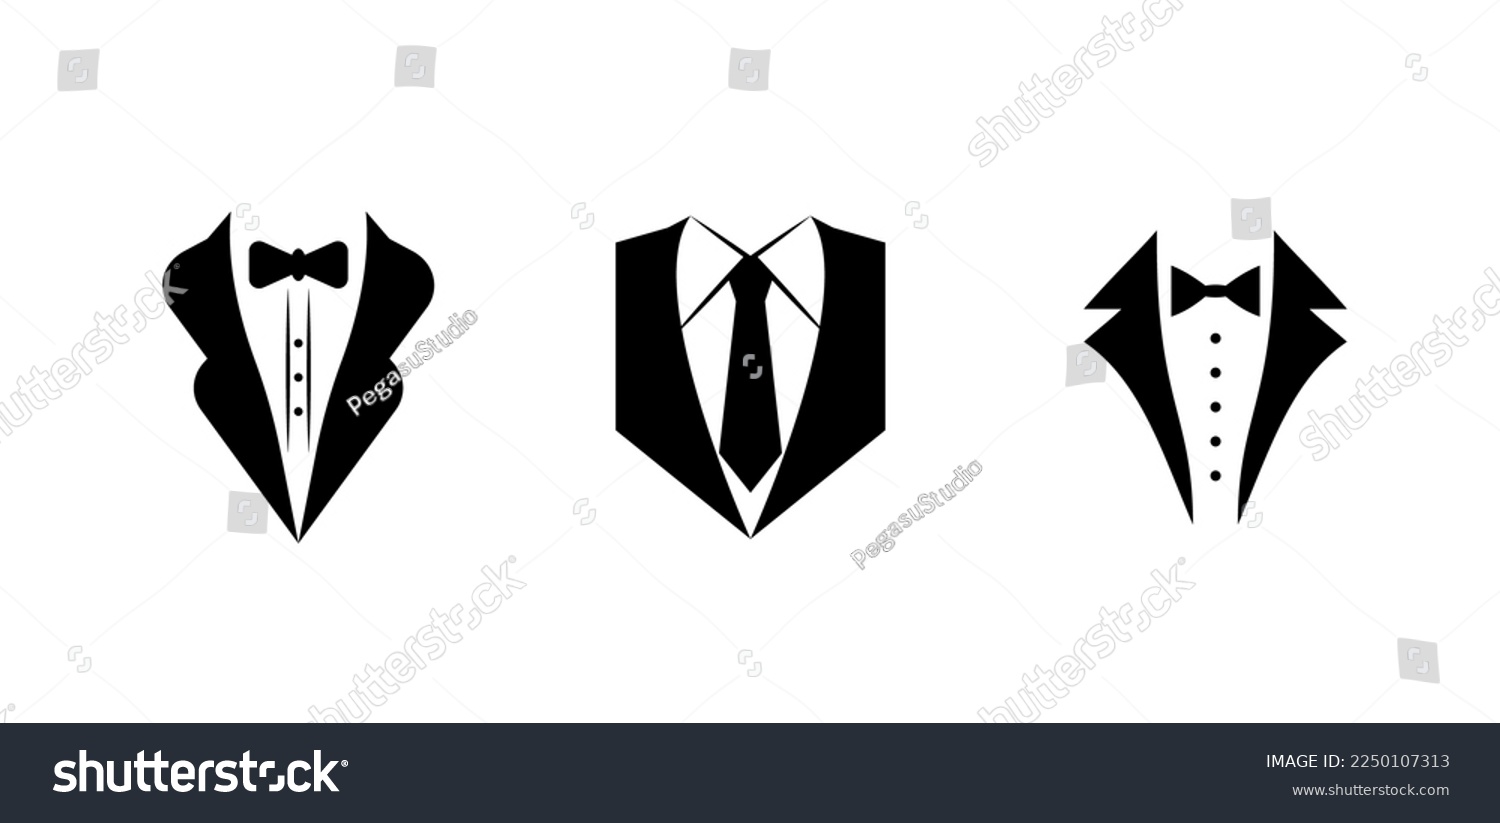 SVG of Wedding tuxedo Bow tie, suit vector Illustration isolated on white background.Tuxedo shirt design. Gentleman svg Clipart Decor Cut Files for Cricut and Silhouette svg